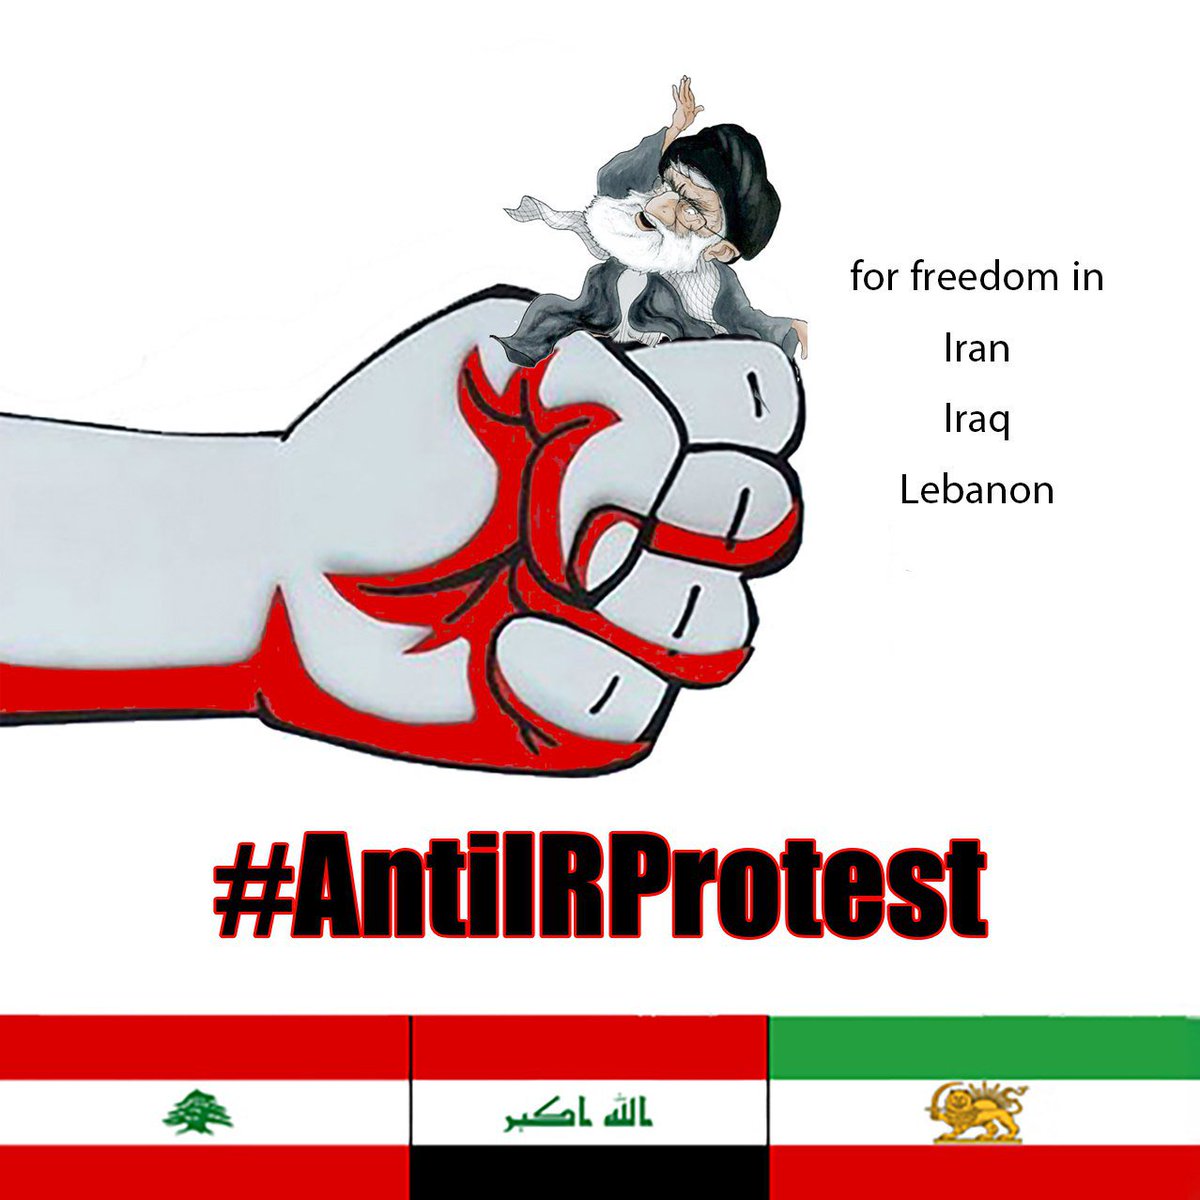 This is the voice of the Middle east people who suffered by Islamic Republic Regime.
We need international help and support (except tweeting) for overthrown this corrupted Regime to bring peace for our countries.
#AntiIRProtest